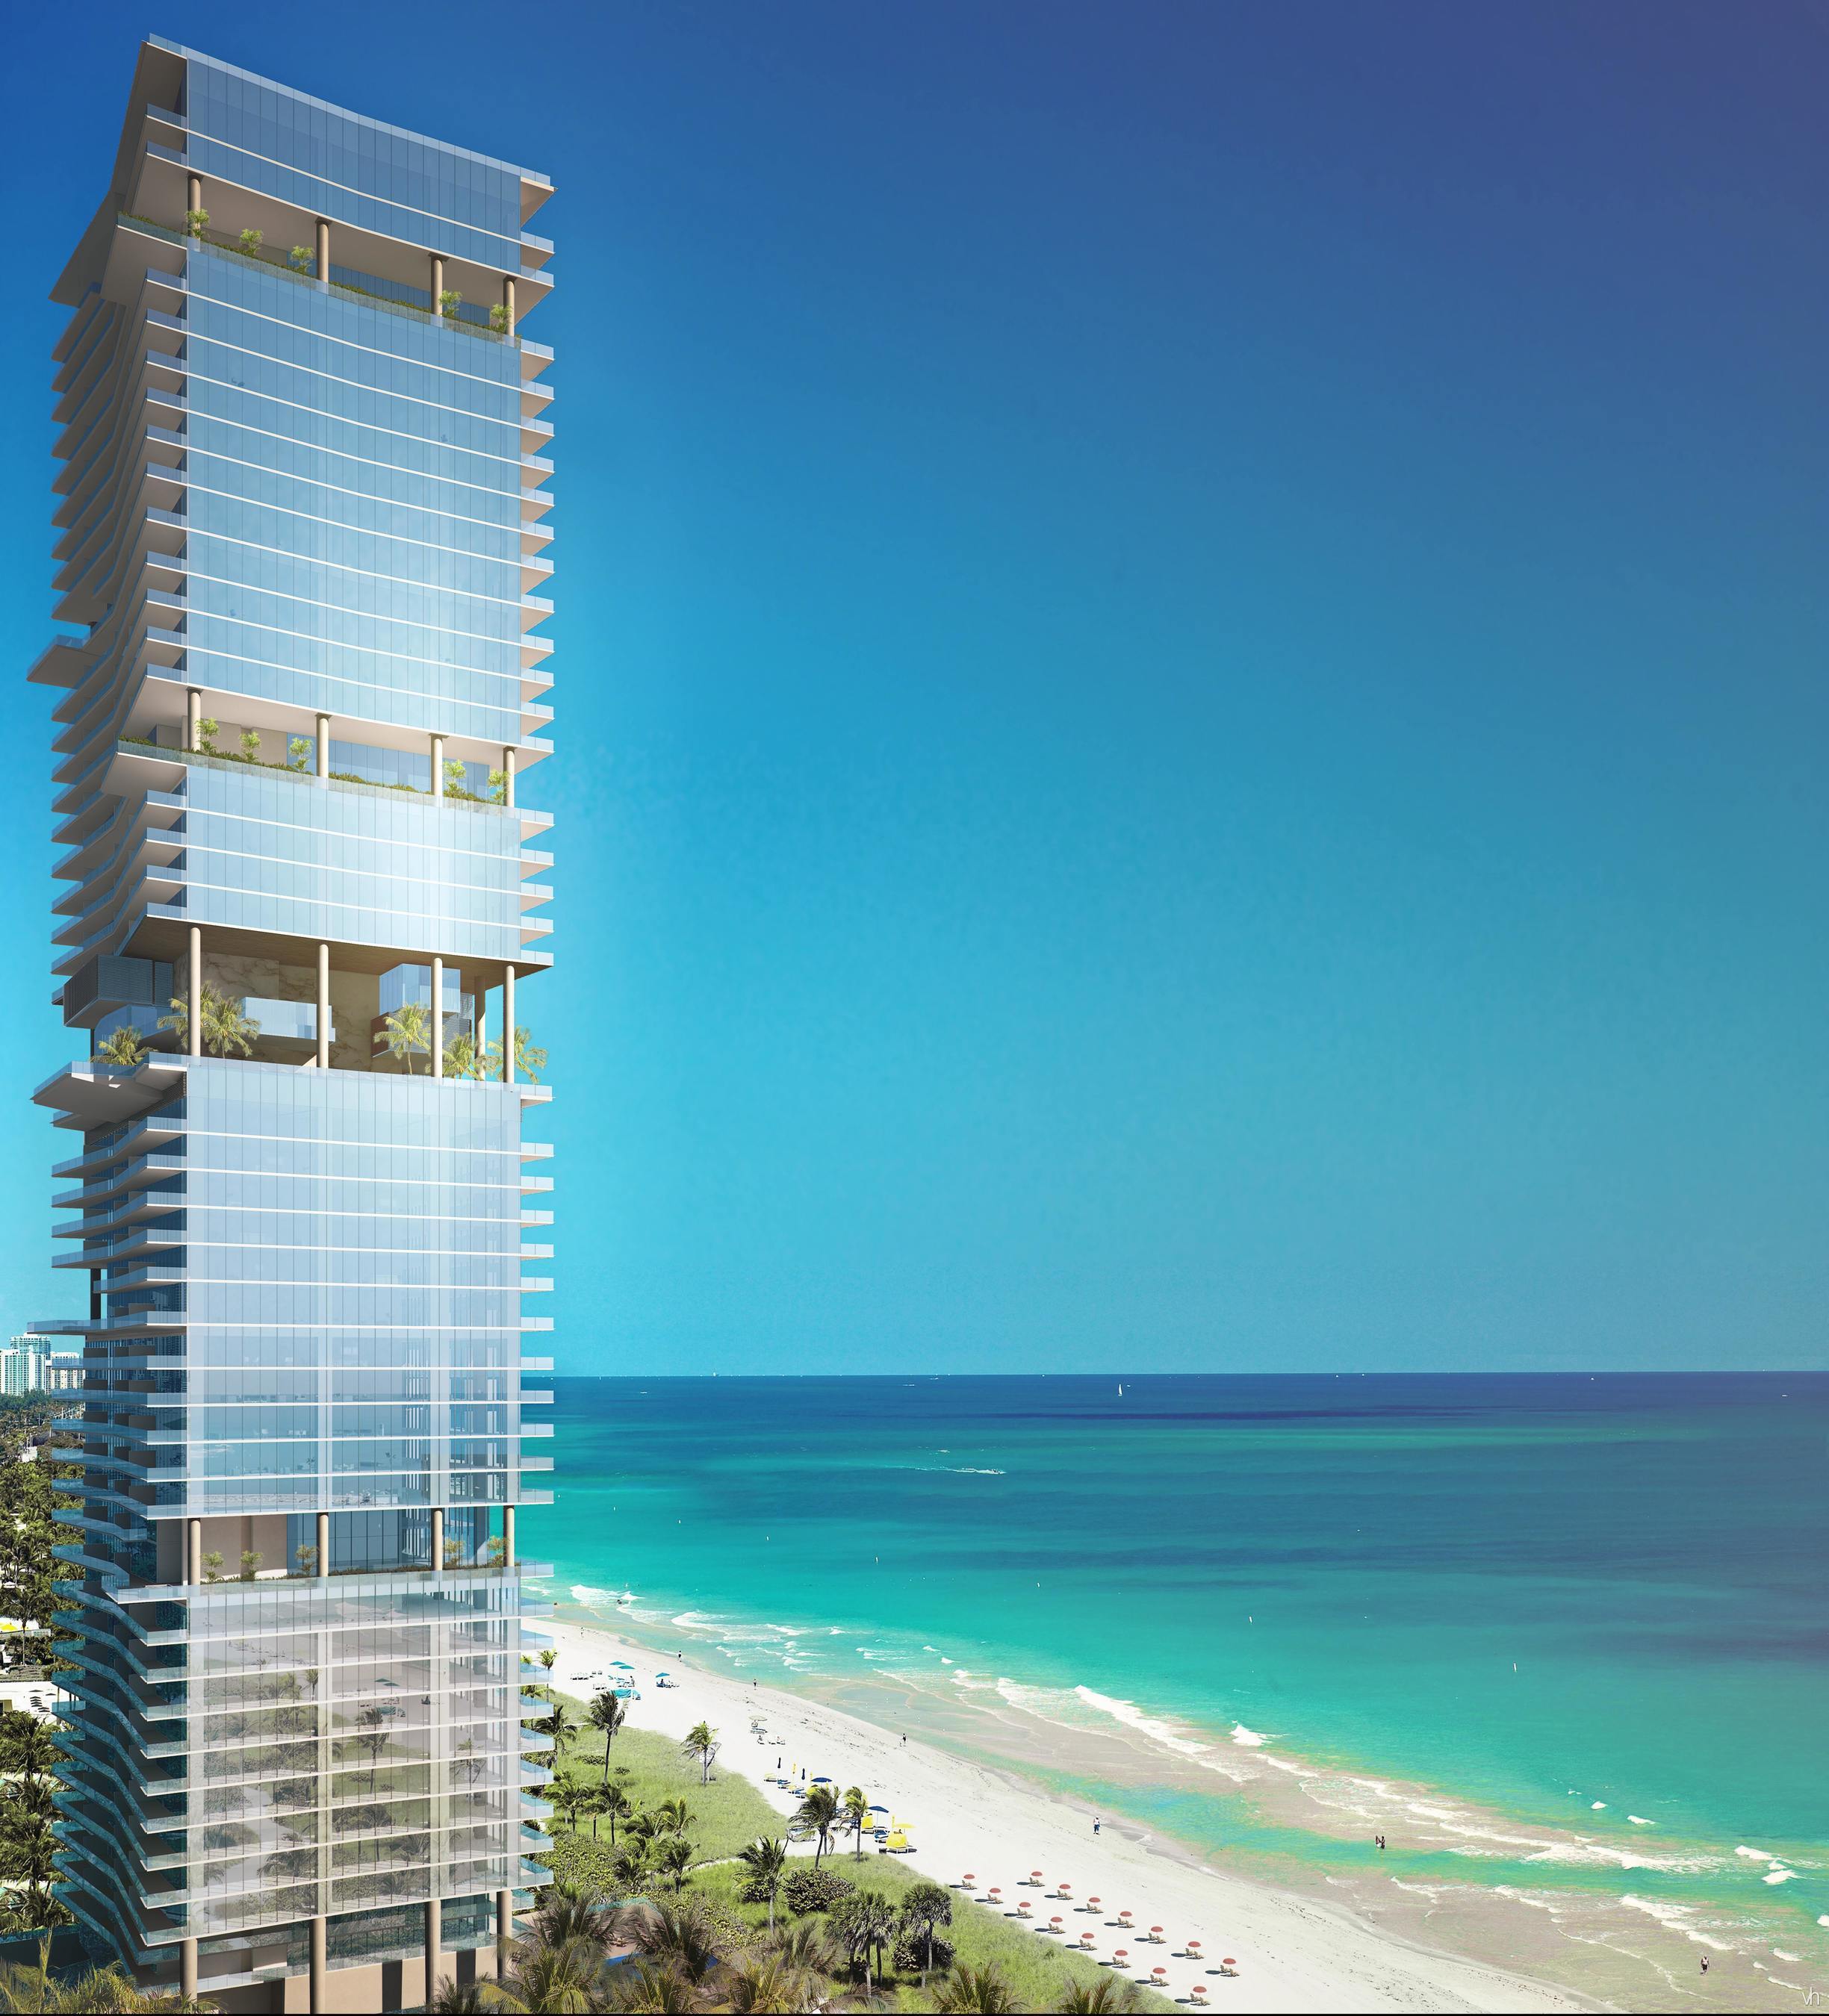 A rendering of Turnberry Ocean Club, a 52-story, 150-unit luxury condominium tower in Sunny Isles Beach, designed by Carlos Zapata, to be built by Turnberry Associates. Condos will be priced from $3 million to $22 million. (PRNewsFoto/Turnberry Ocean Club)